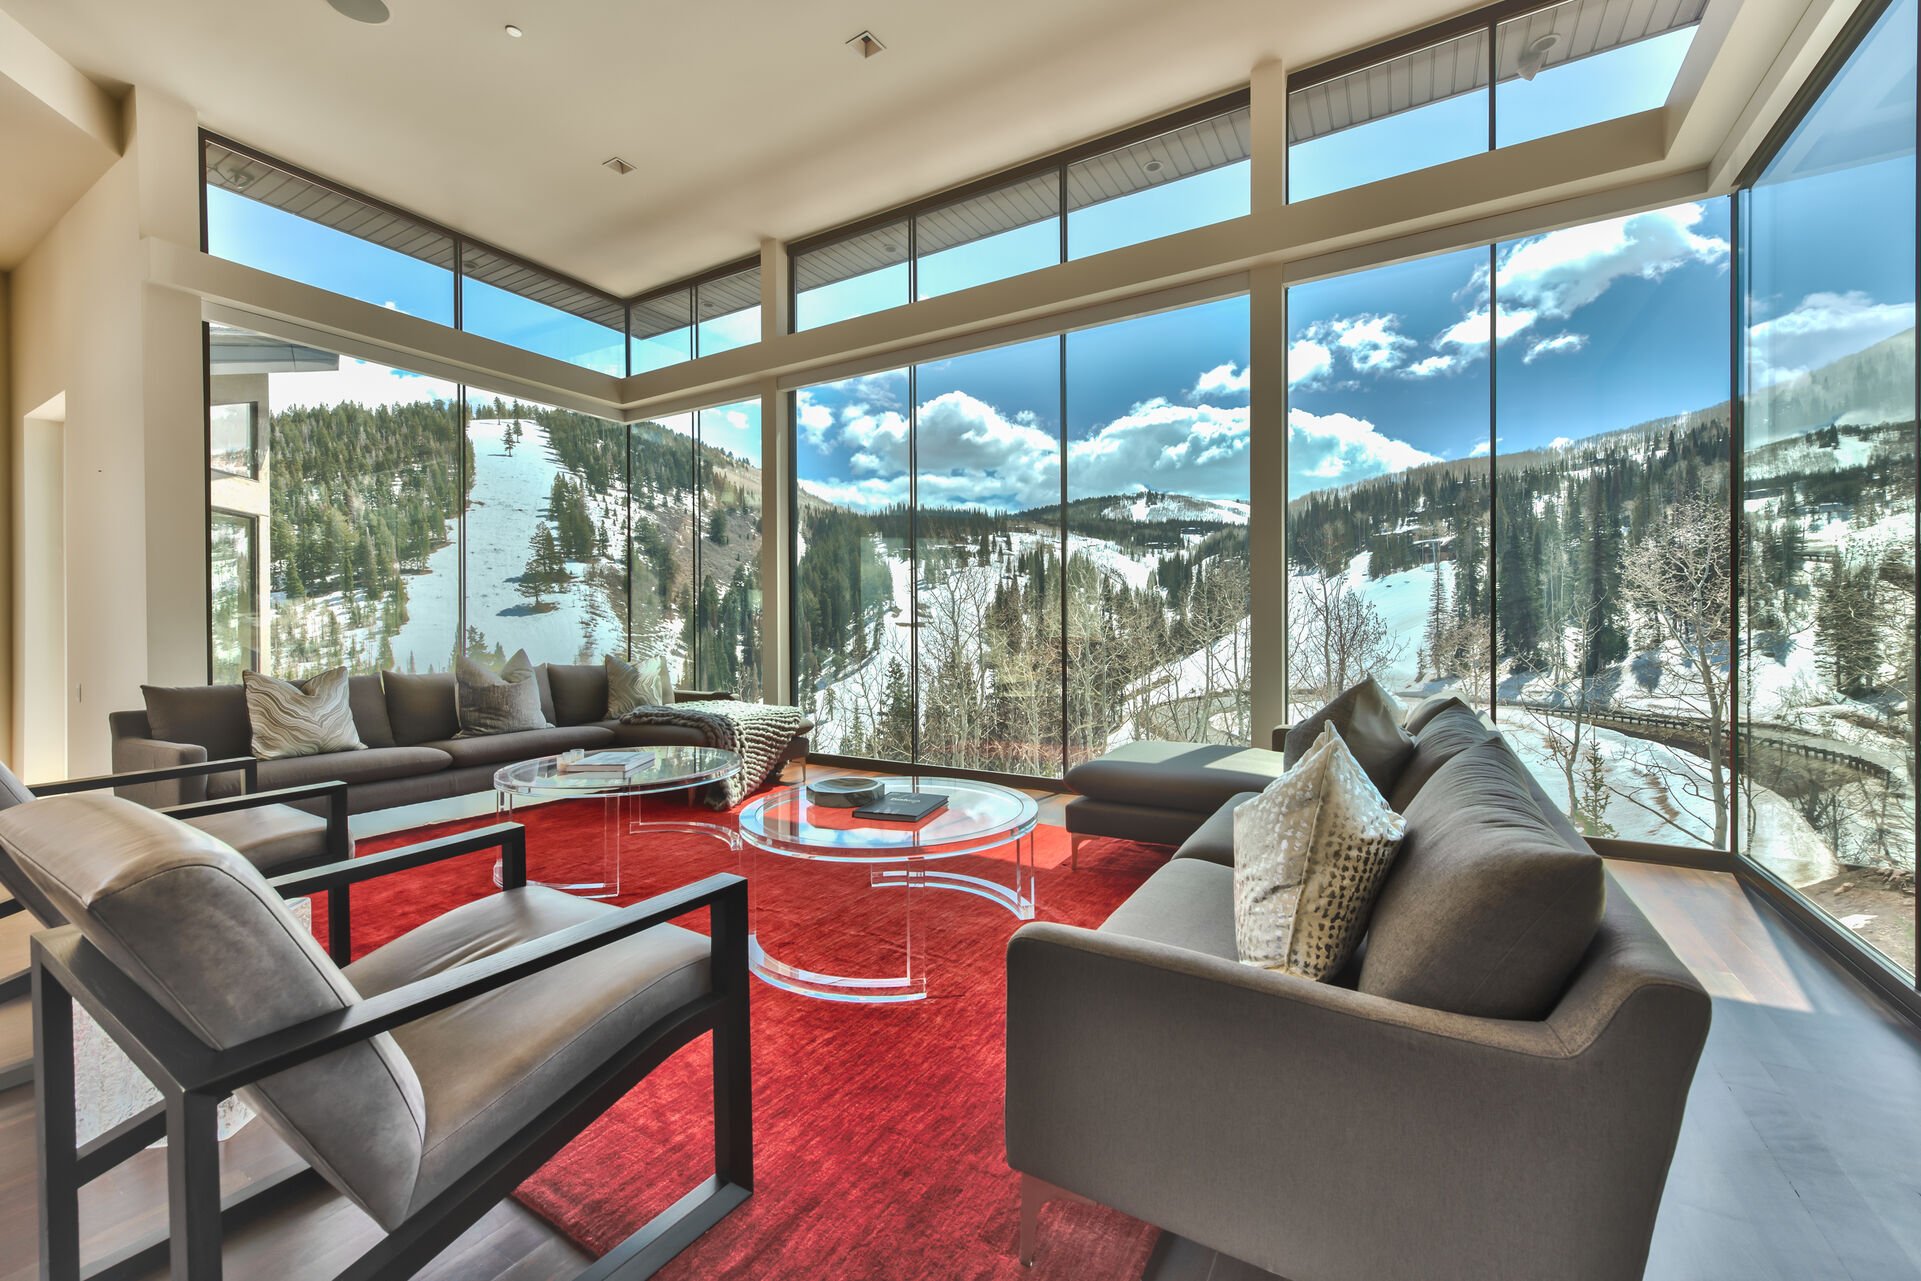 High Ceilings and Massive Windows Surrounded by Mountain Views